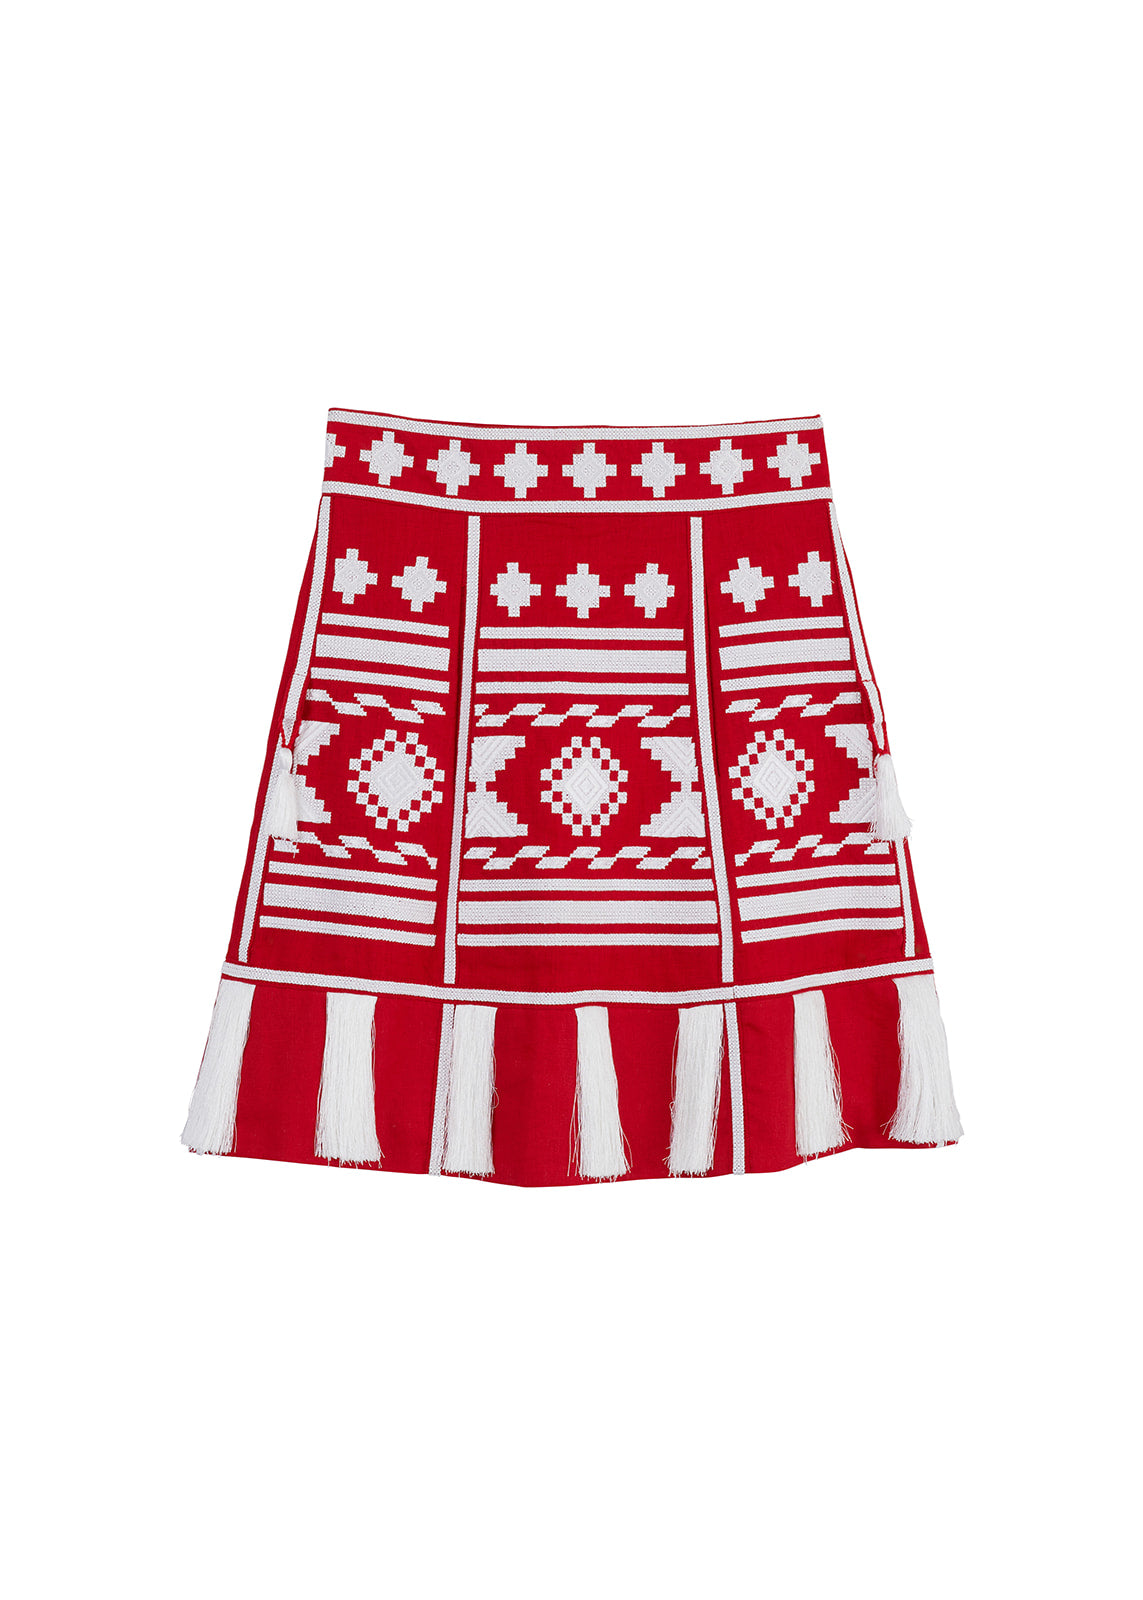 Frances Embroidered Ukrainian Skirt - Red and White